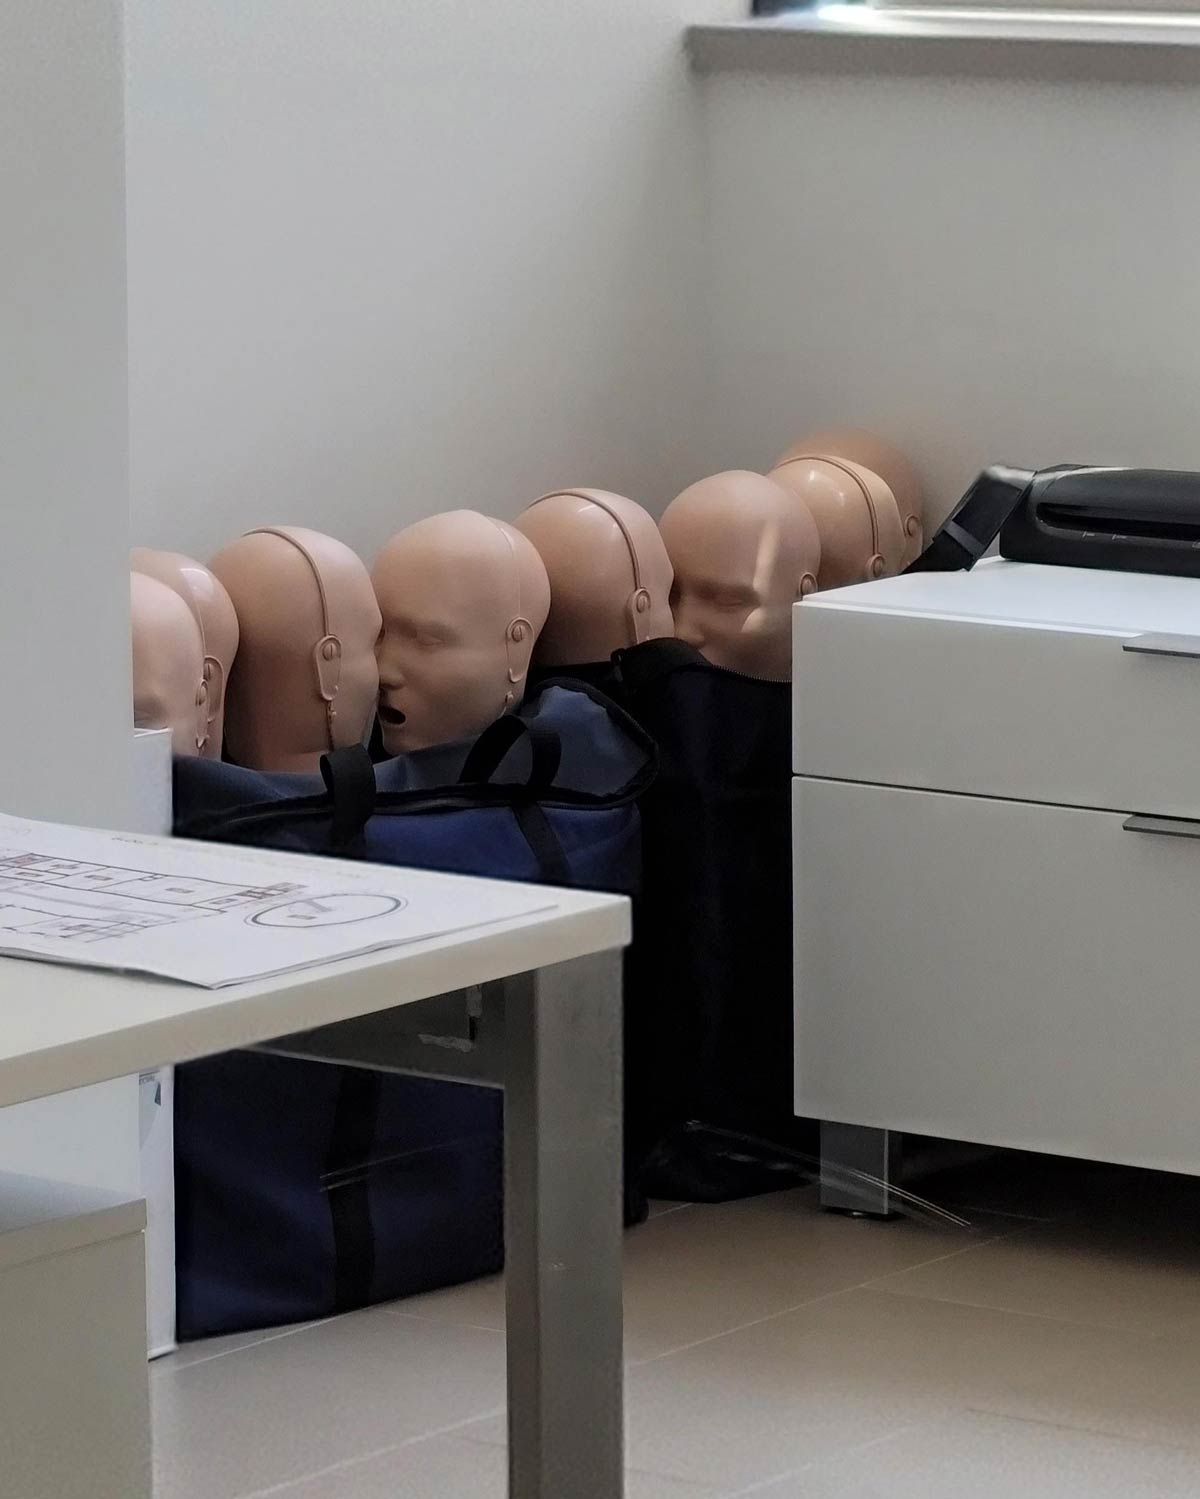 The way our Safety Manager stores the CPR training dummies